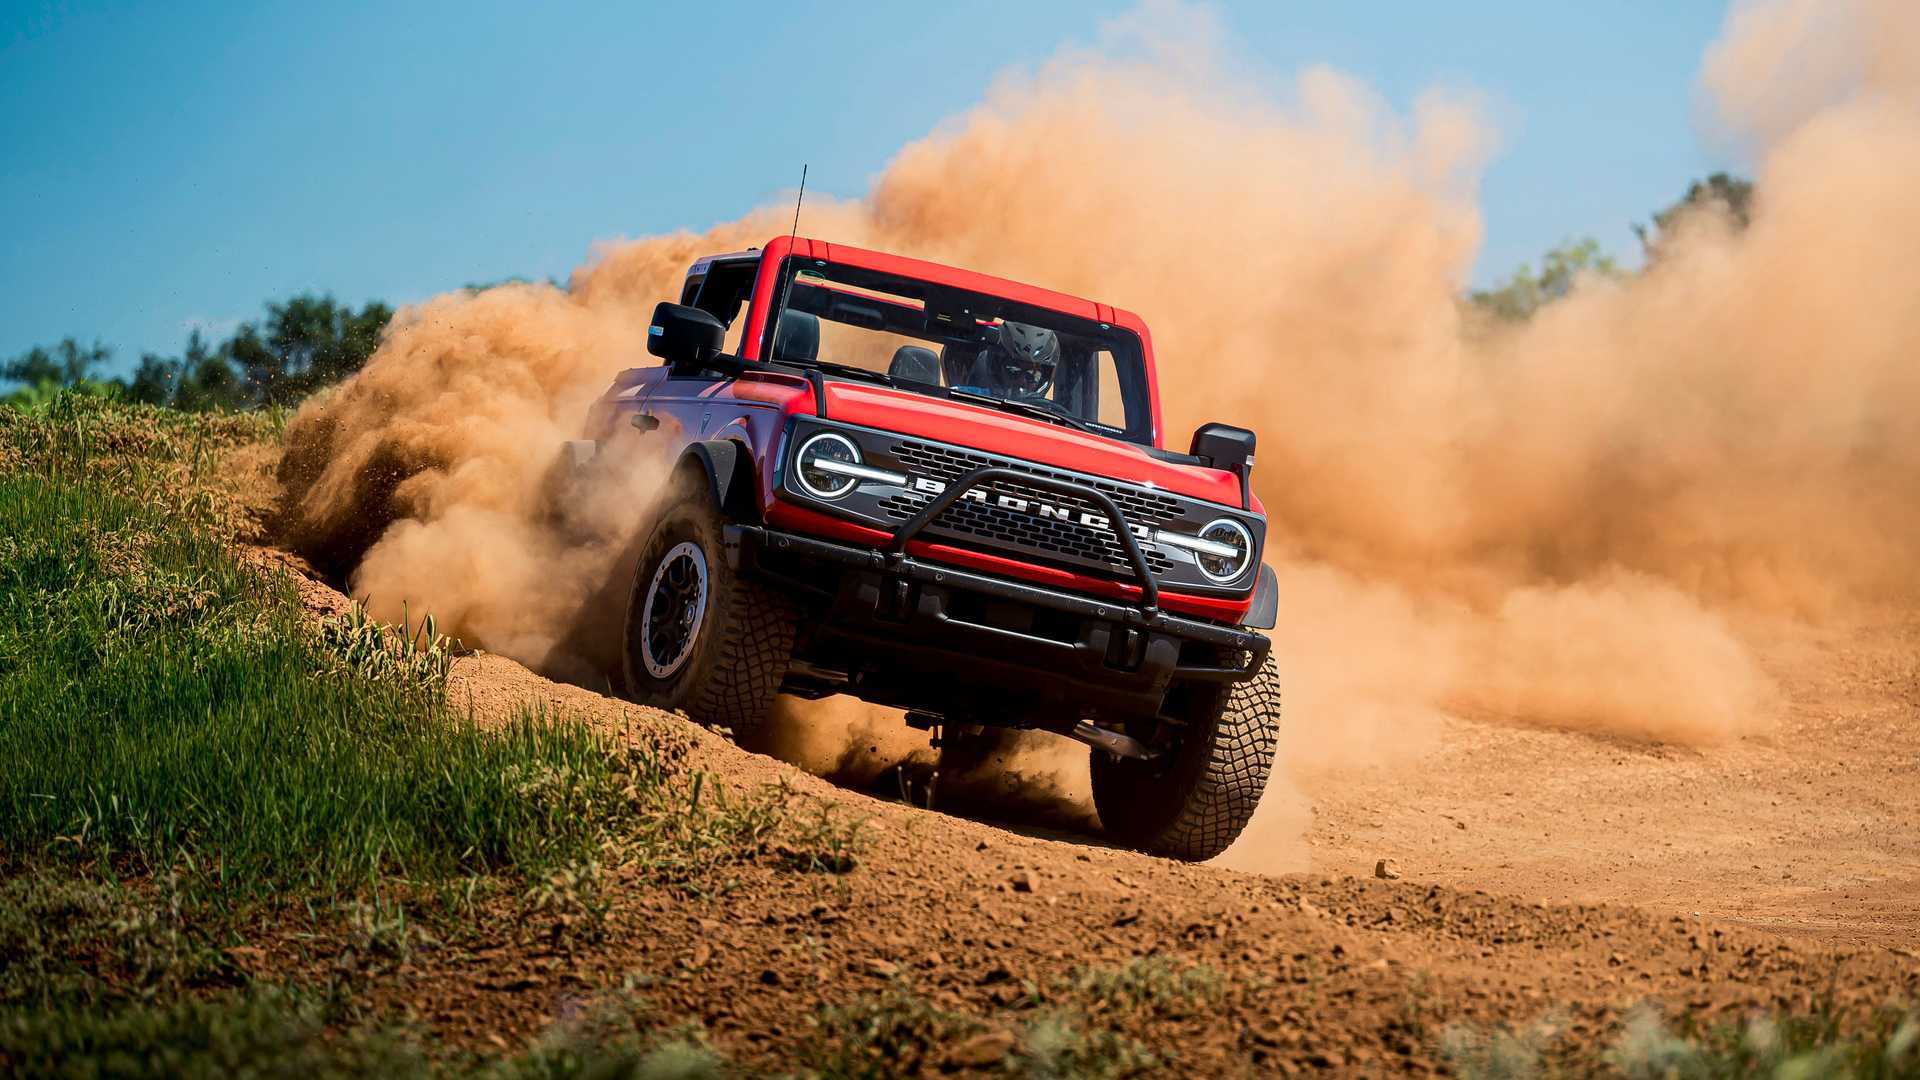 2022 Ford Bronco To Offer Fewer Exterior Color Options, No Green